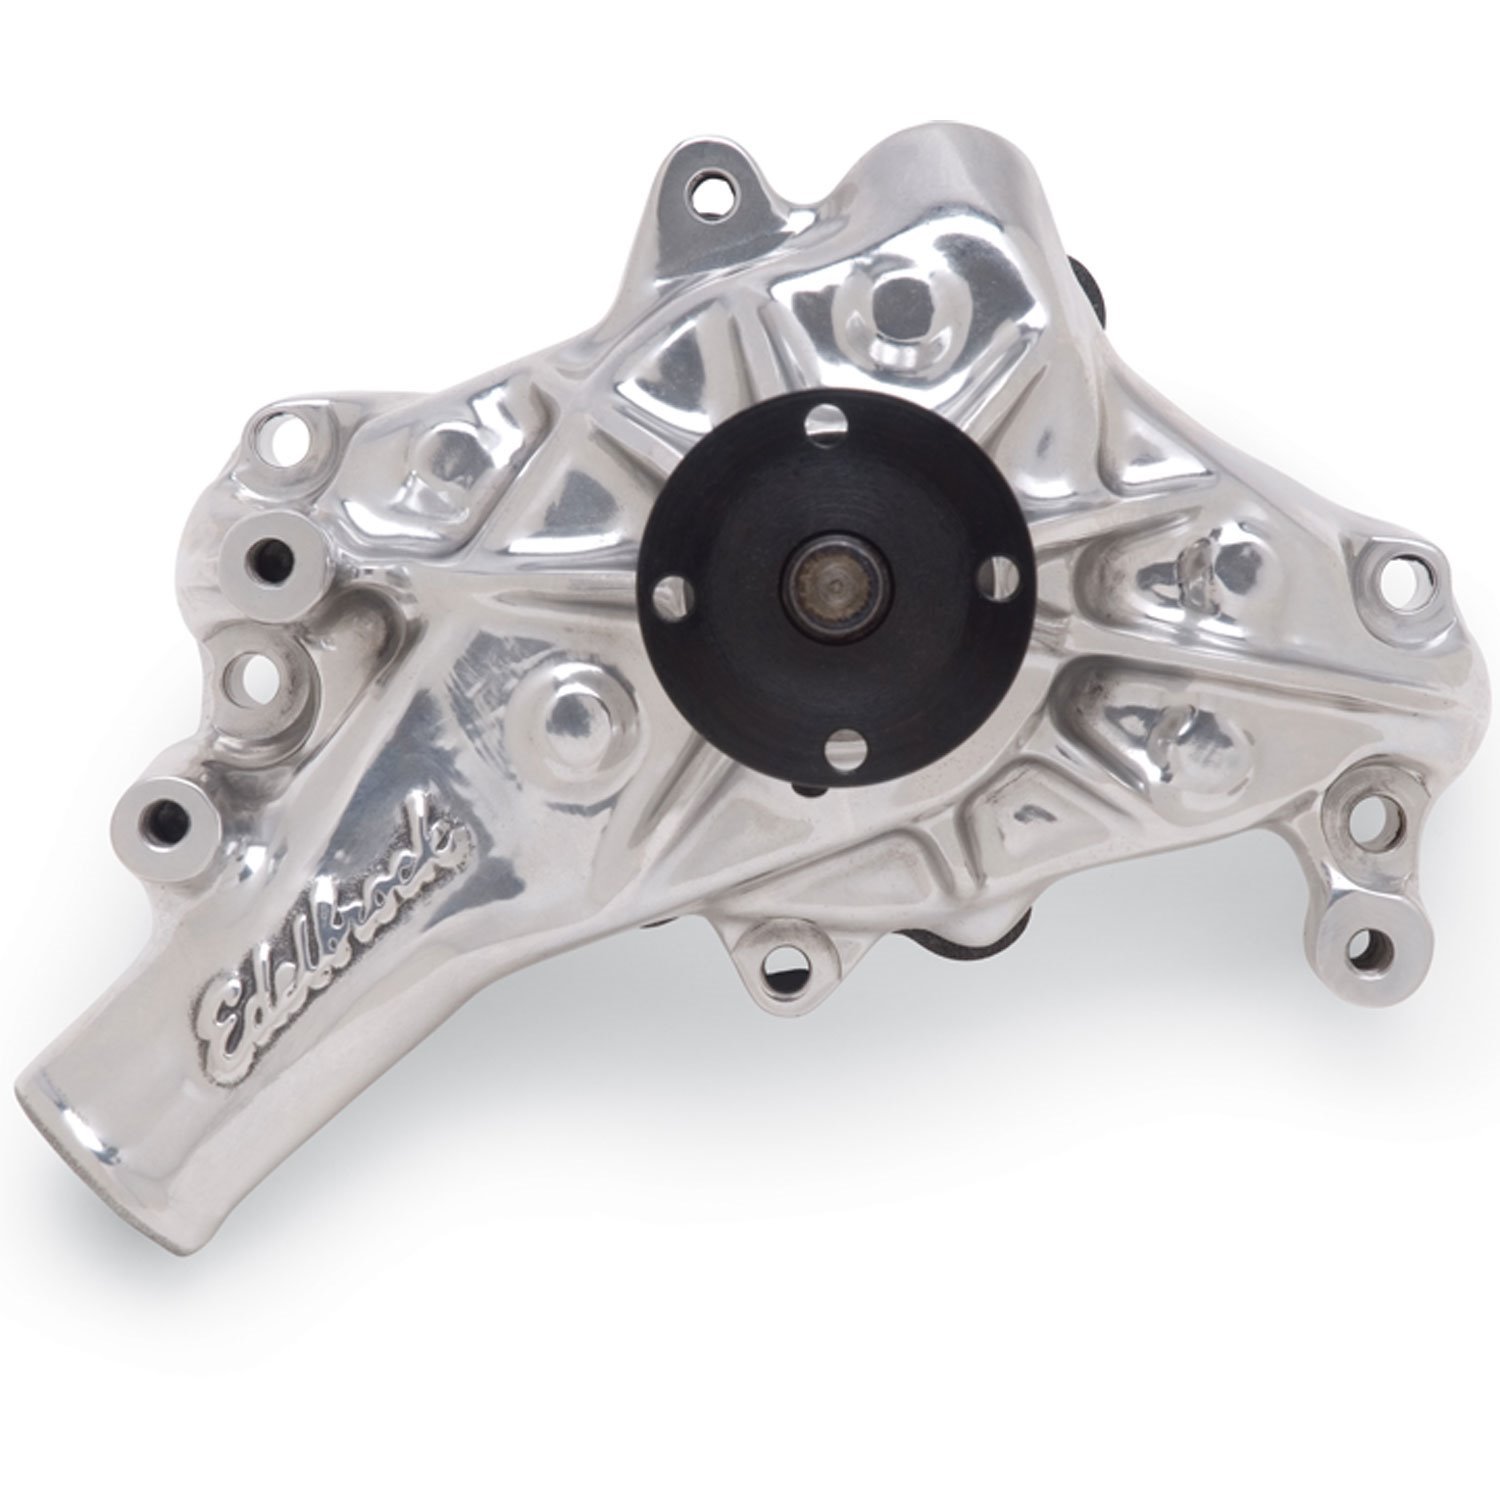 Victor Series Polished Aluminum Water Pump for 1969-1987 Small Block Chevy and 90° V6